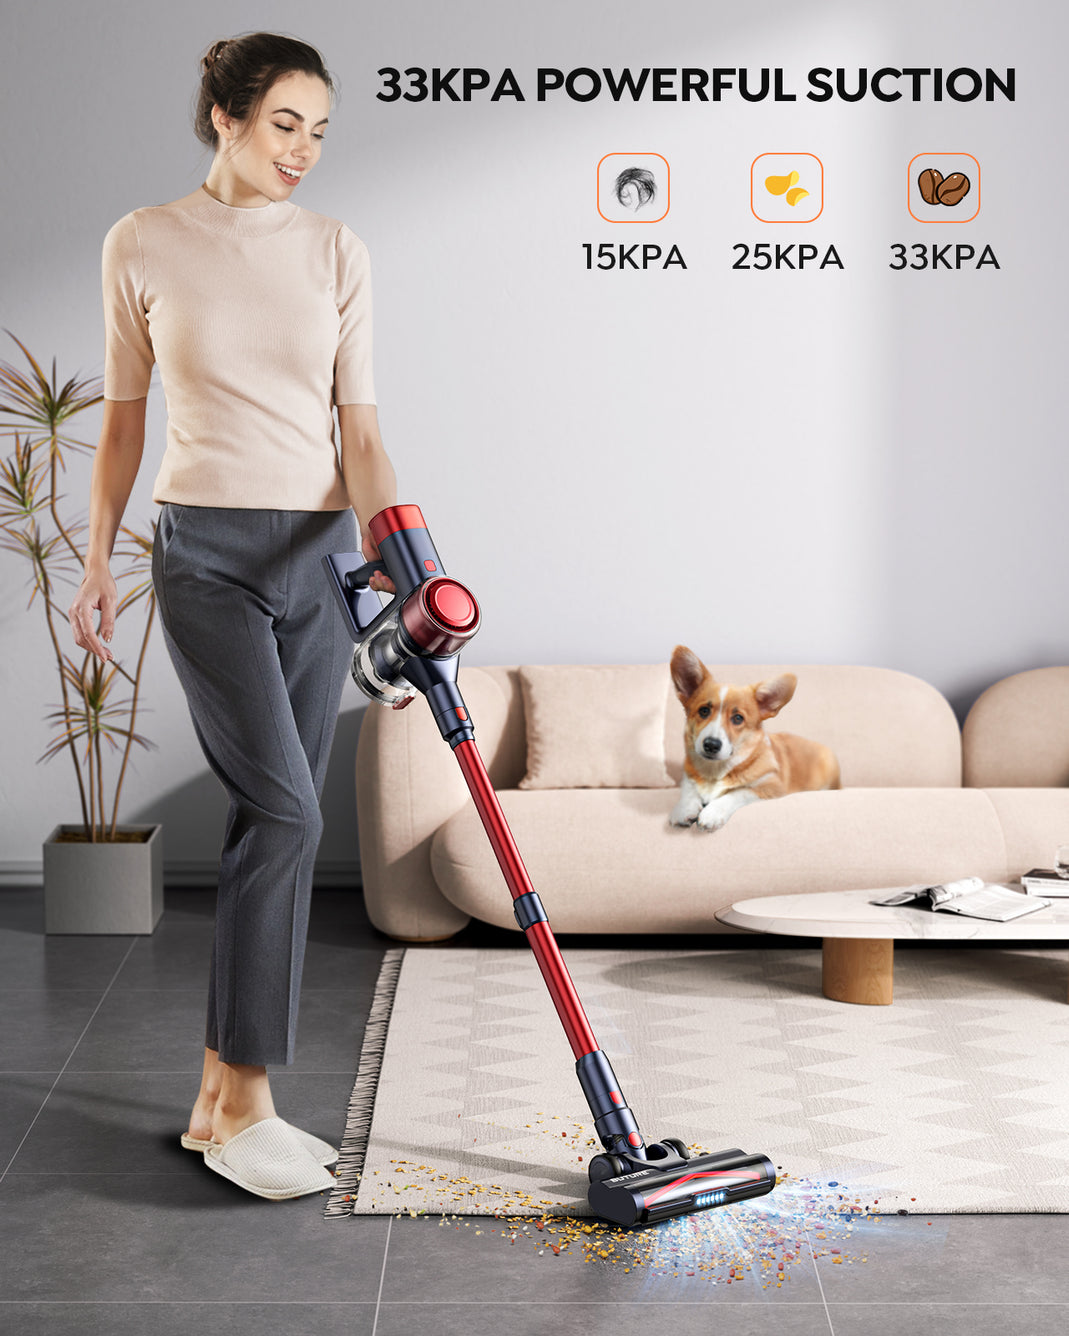 Buture Cordless Stick Vacuum Cleaners 450W 38KPa 55mins with Touch